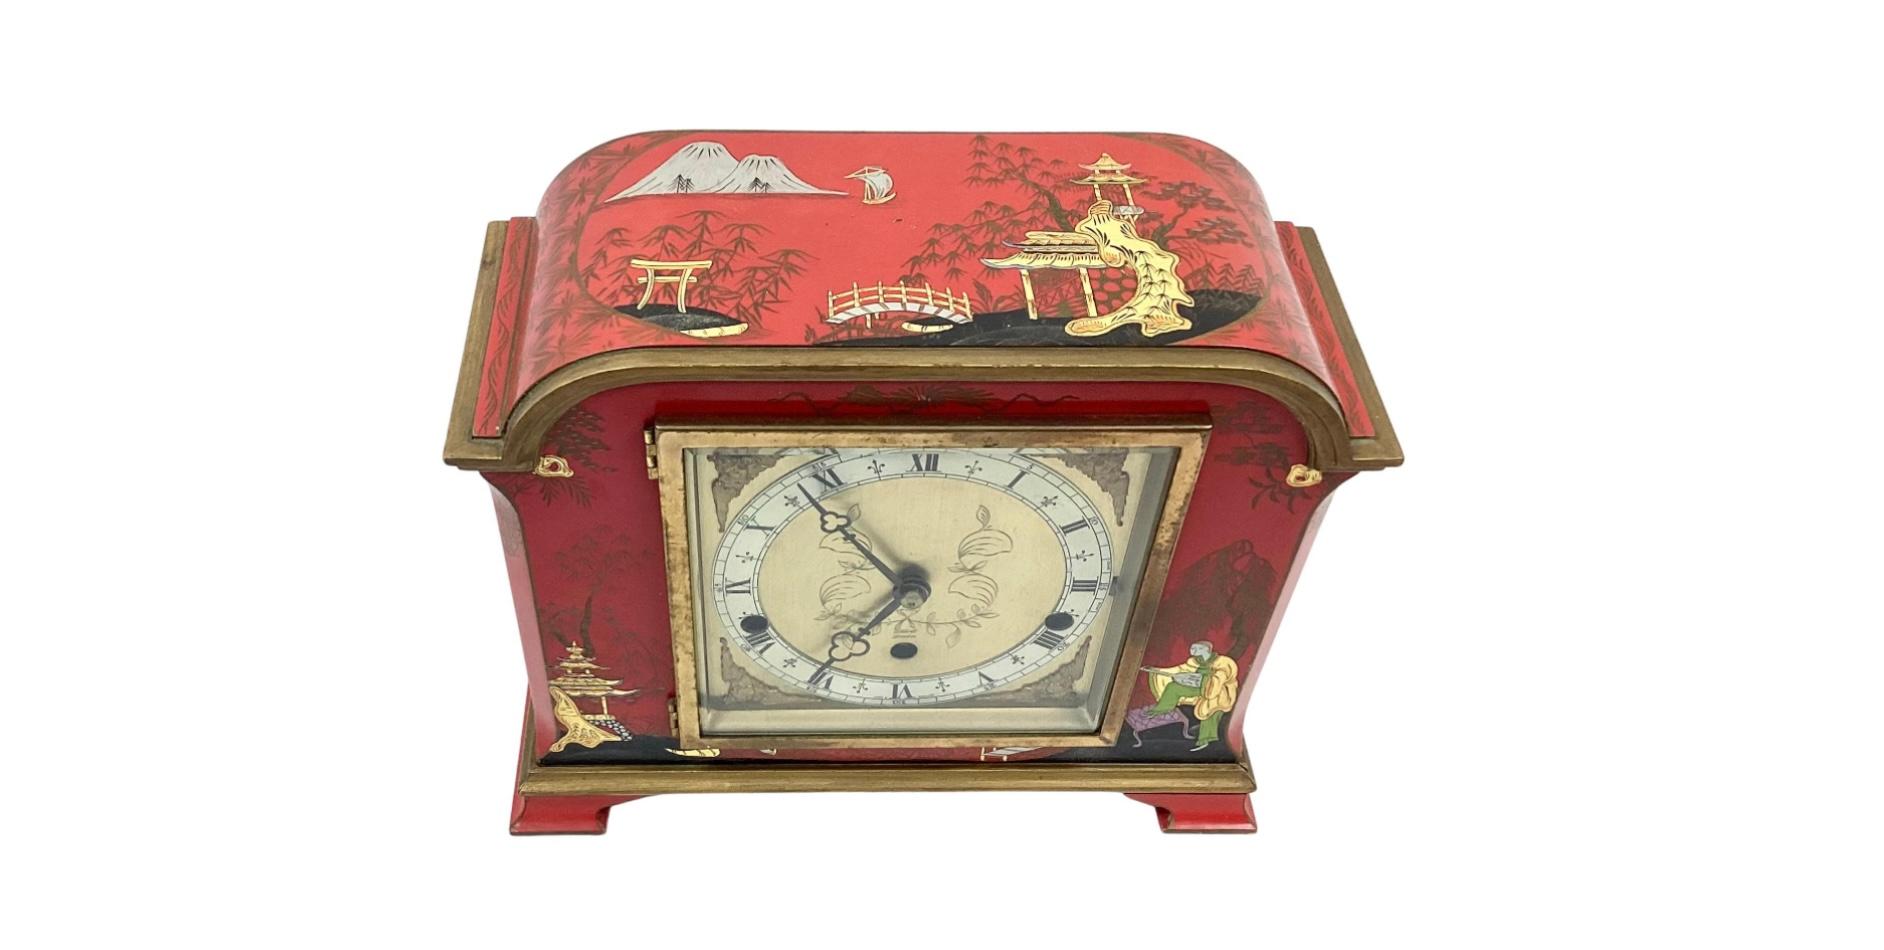 Red Chinoiserie decorated mantel clock, early to mid 20th century. Decorated with embossed Chinese garden scenes with figures, pagodas, and trees. Clock face is signed with 'Elliot London'. Back workings of clock stamped: 